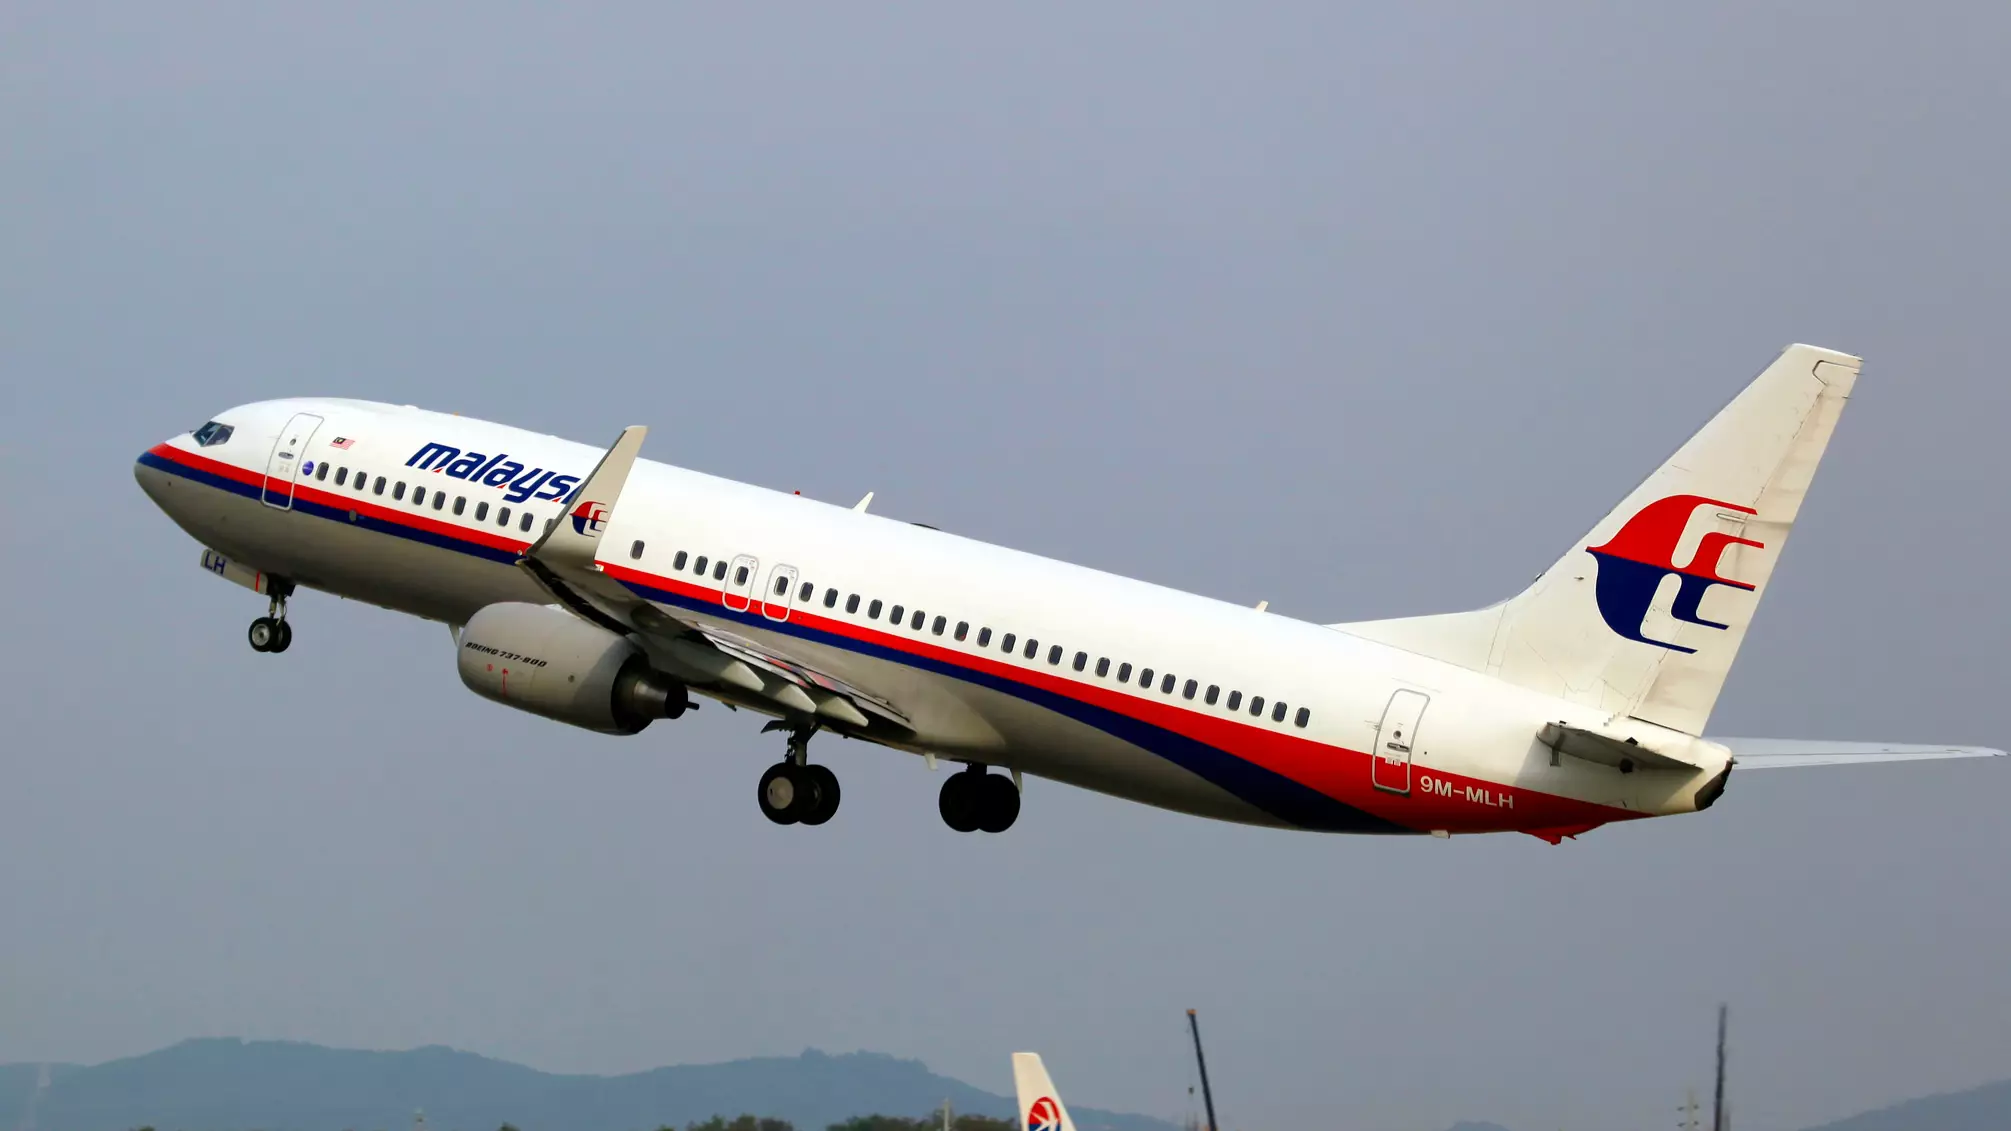 MH370 Final Report 'Cannot Exclude Possibility' Of Third Party Interference